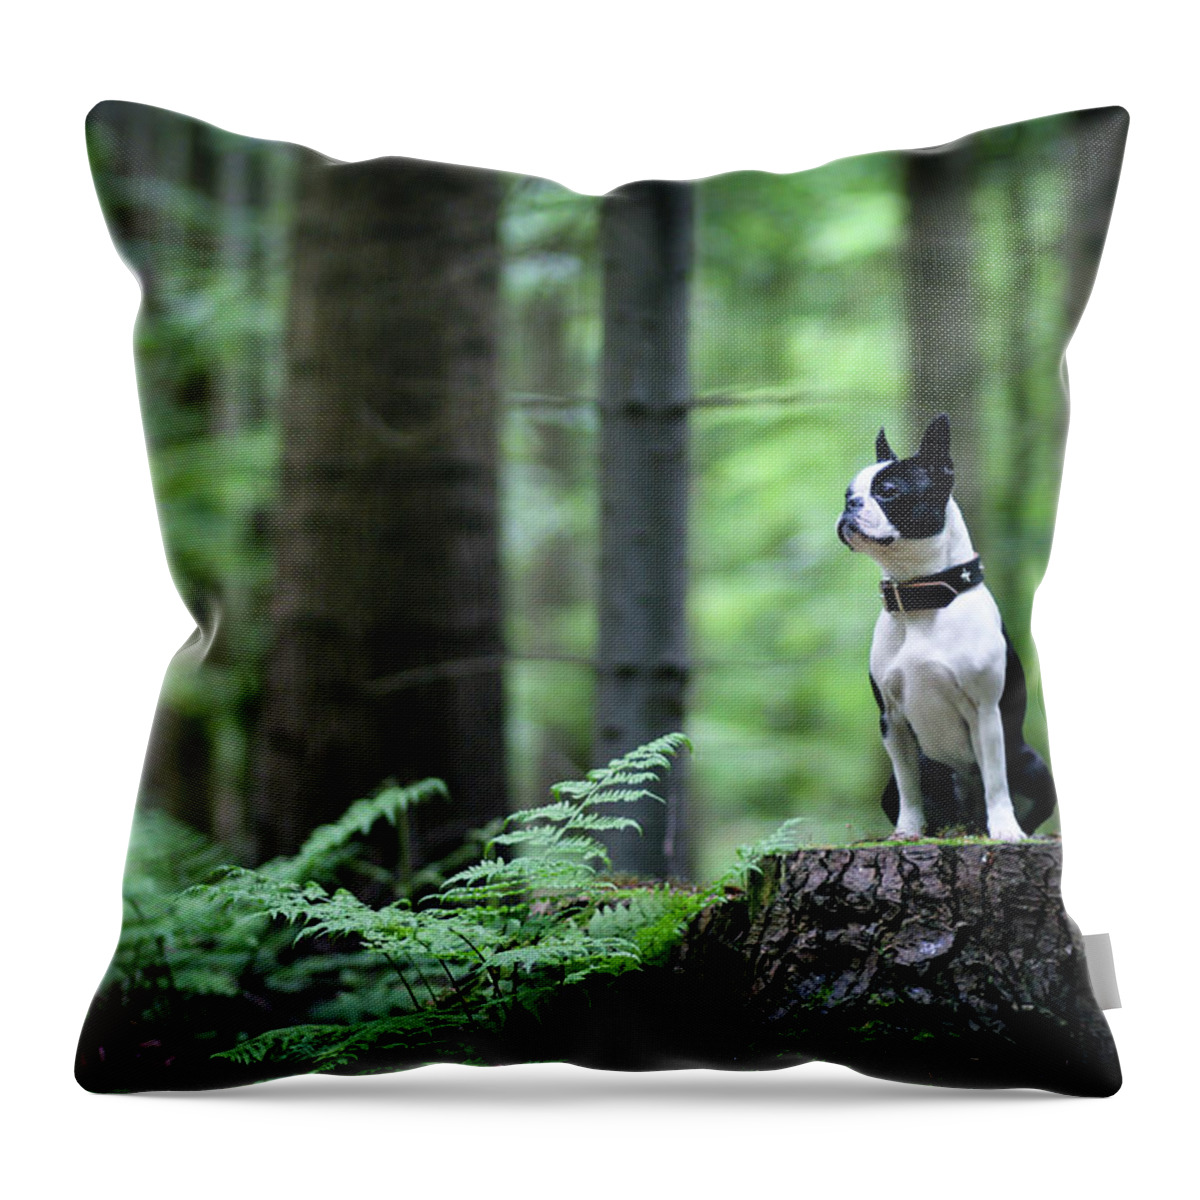 Pets Throw Pillow featuring the photograph Boston Terrier Sitting On A Stub In The by Tereza Jancikova